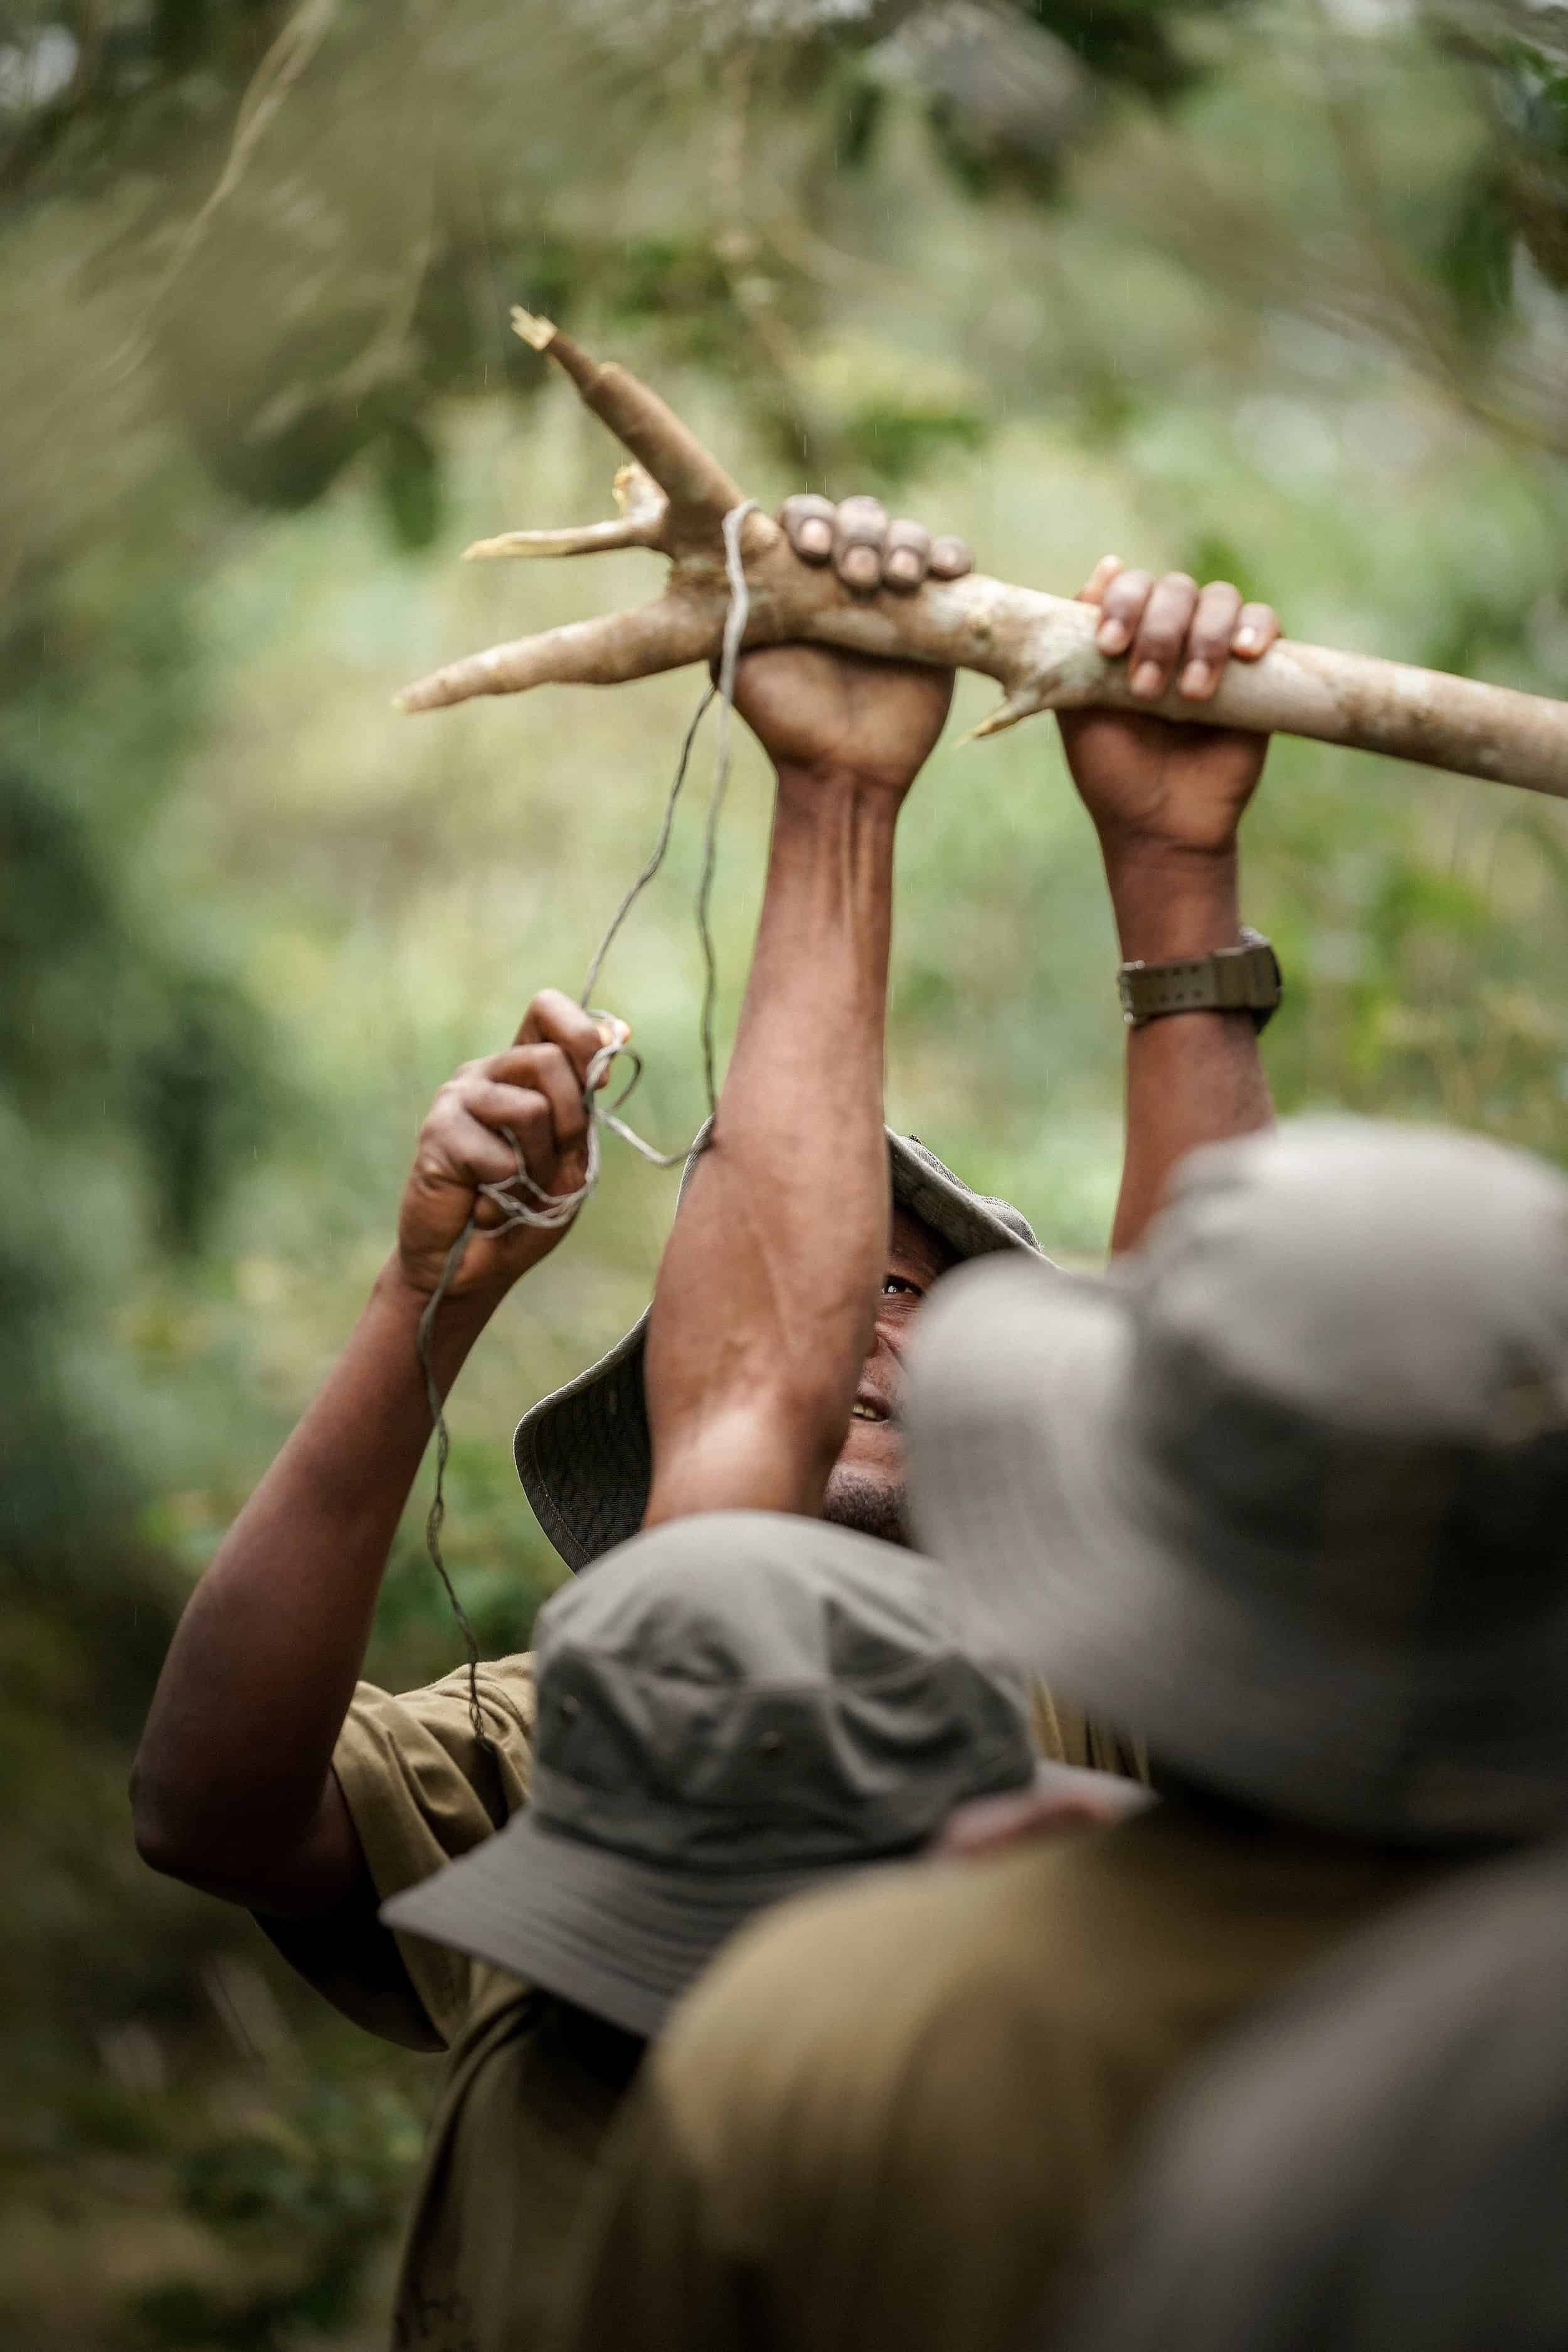 Men hold on to branch in jungle to remove tension snare